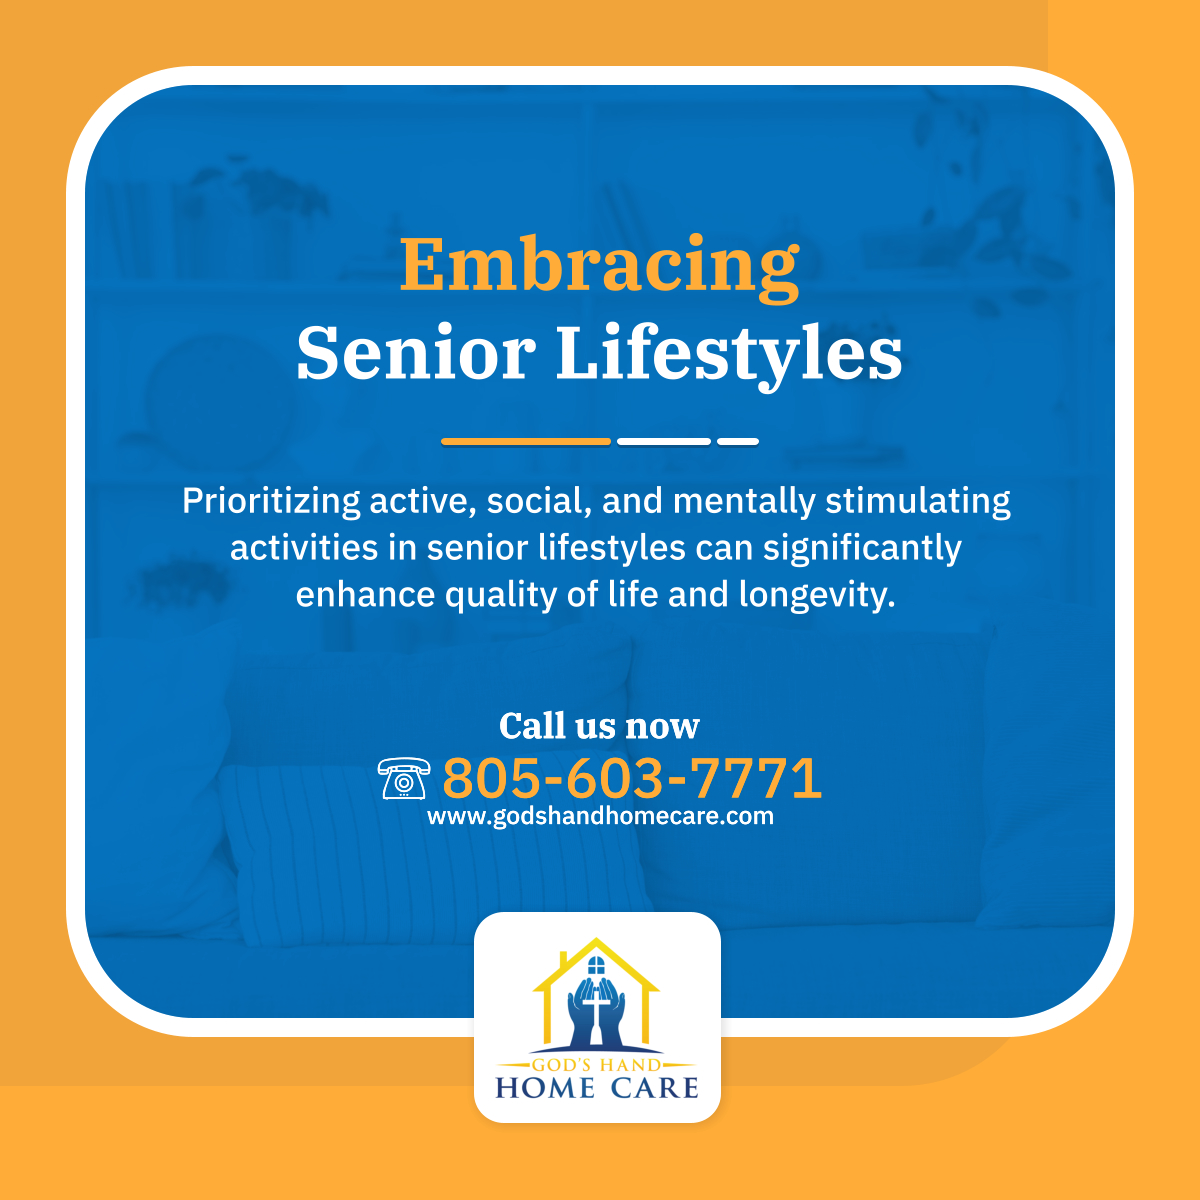 Senior lifestyles are more than just routine; they're about embracing each day with activities that stimulate the mind, body, and spirit. Let's encourage a vibrant way of living. 

#OxnardCA #HomeCare #SeniorWellness